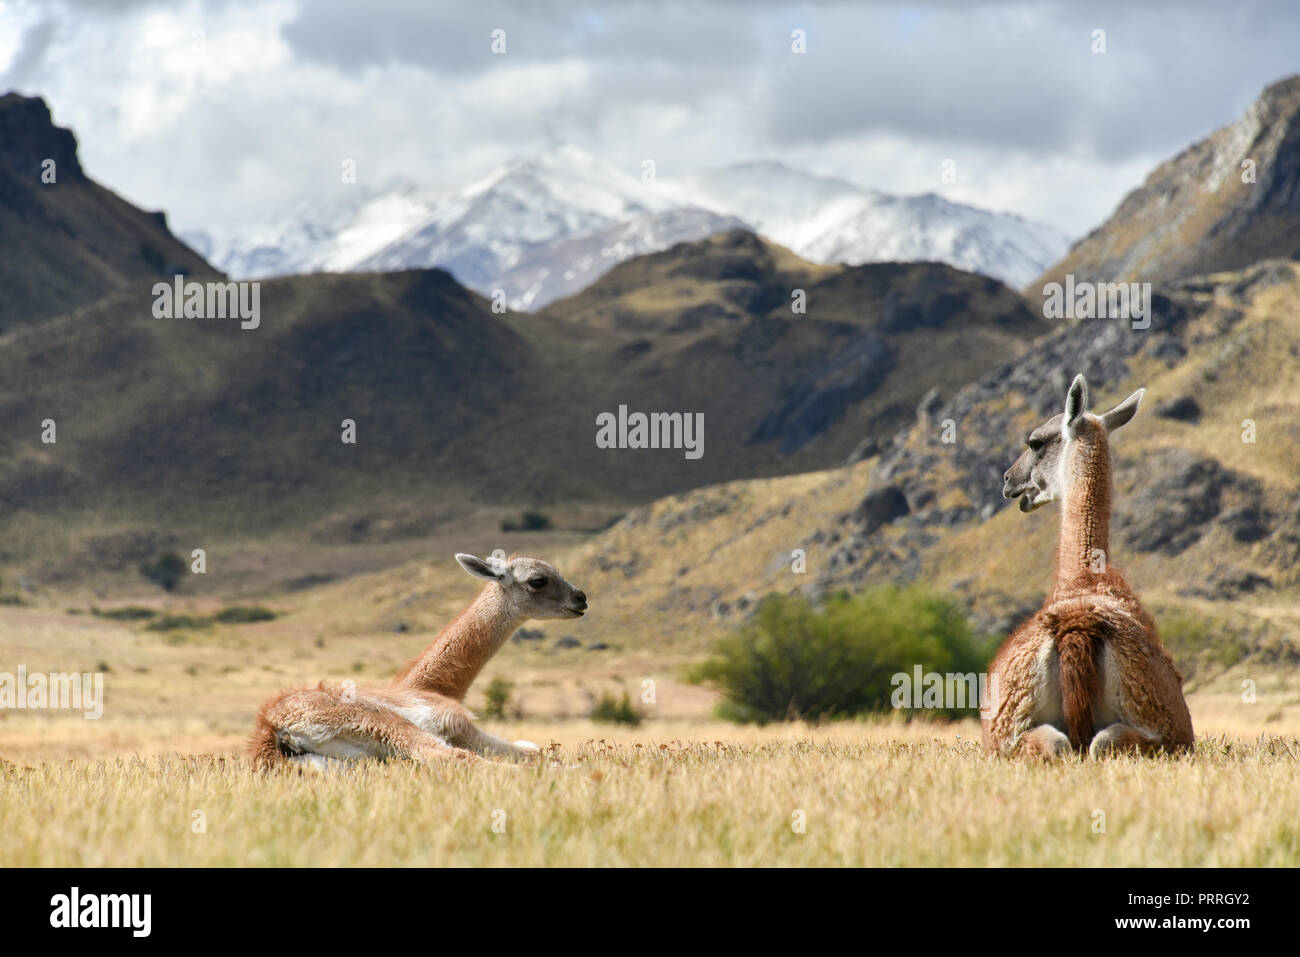 Guanacos (Lama guanicoe), dam and young animal in the Patagonia Park, Careetera austral, Chacabuco Valley, Aysen, Patagonia Stock Photo